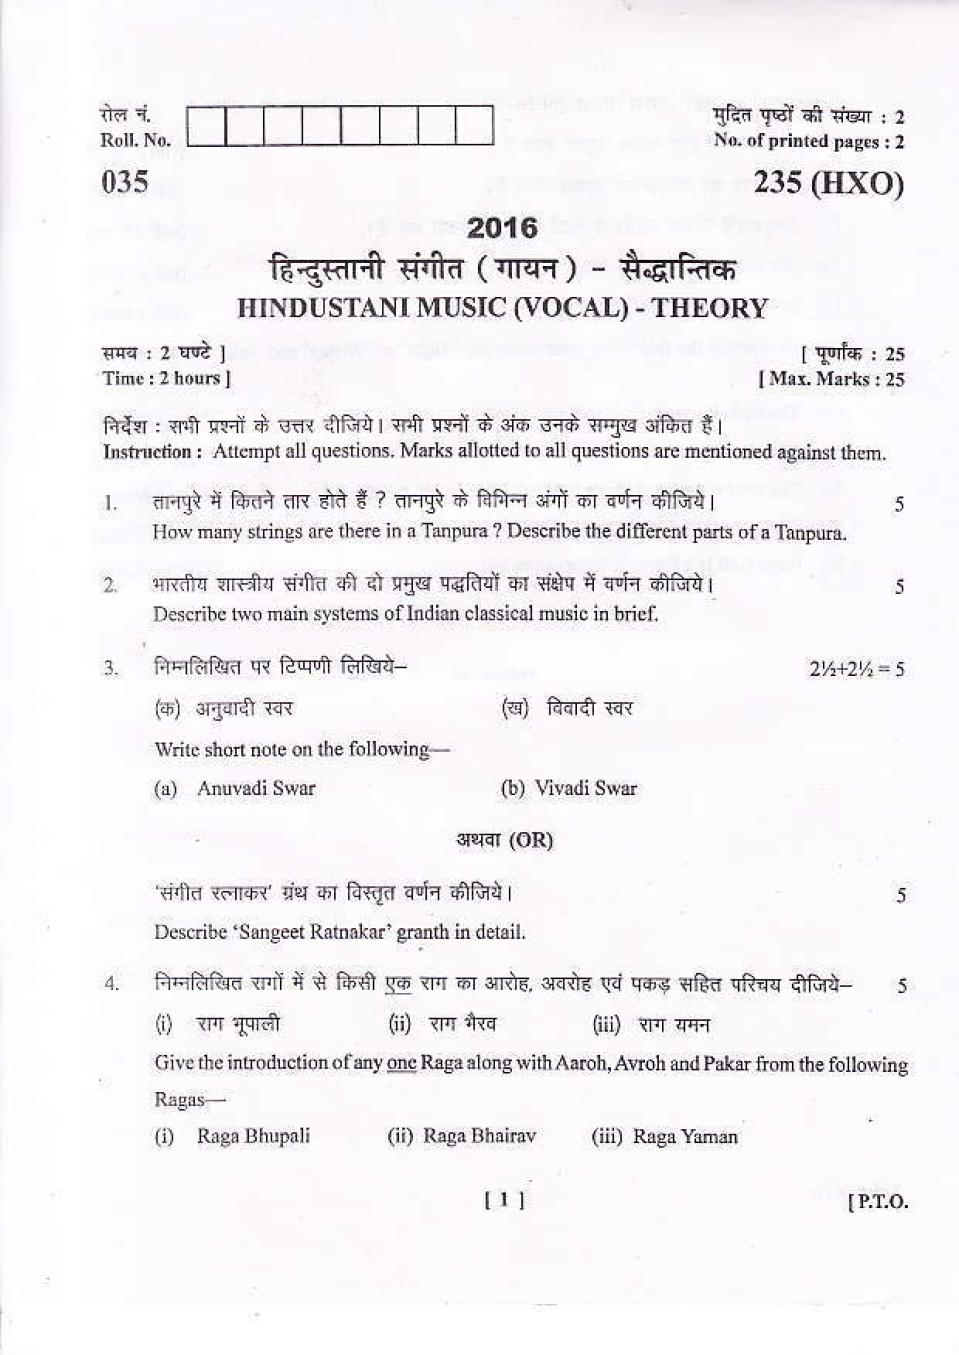 Uttarakhand Board Class 10 Question Paper 2016 for Hindustani Music (Vocal) - Theory - Page 1